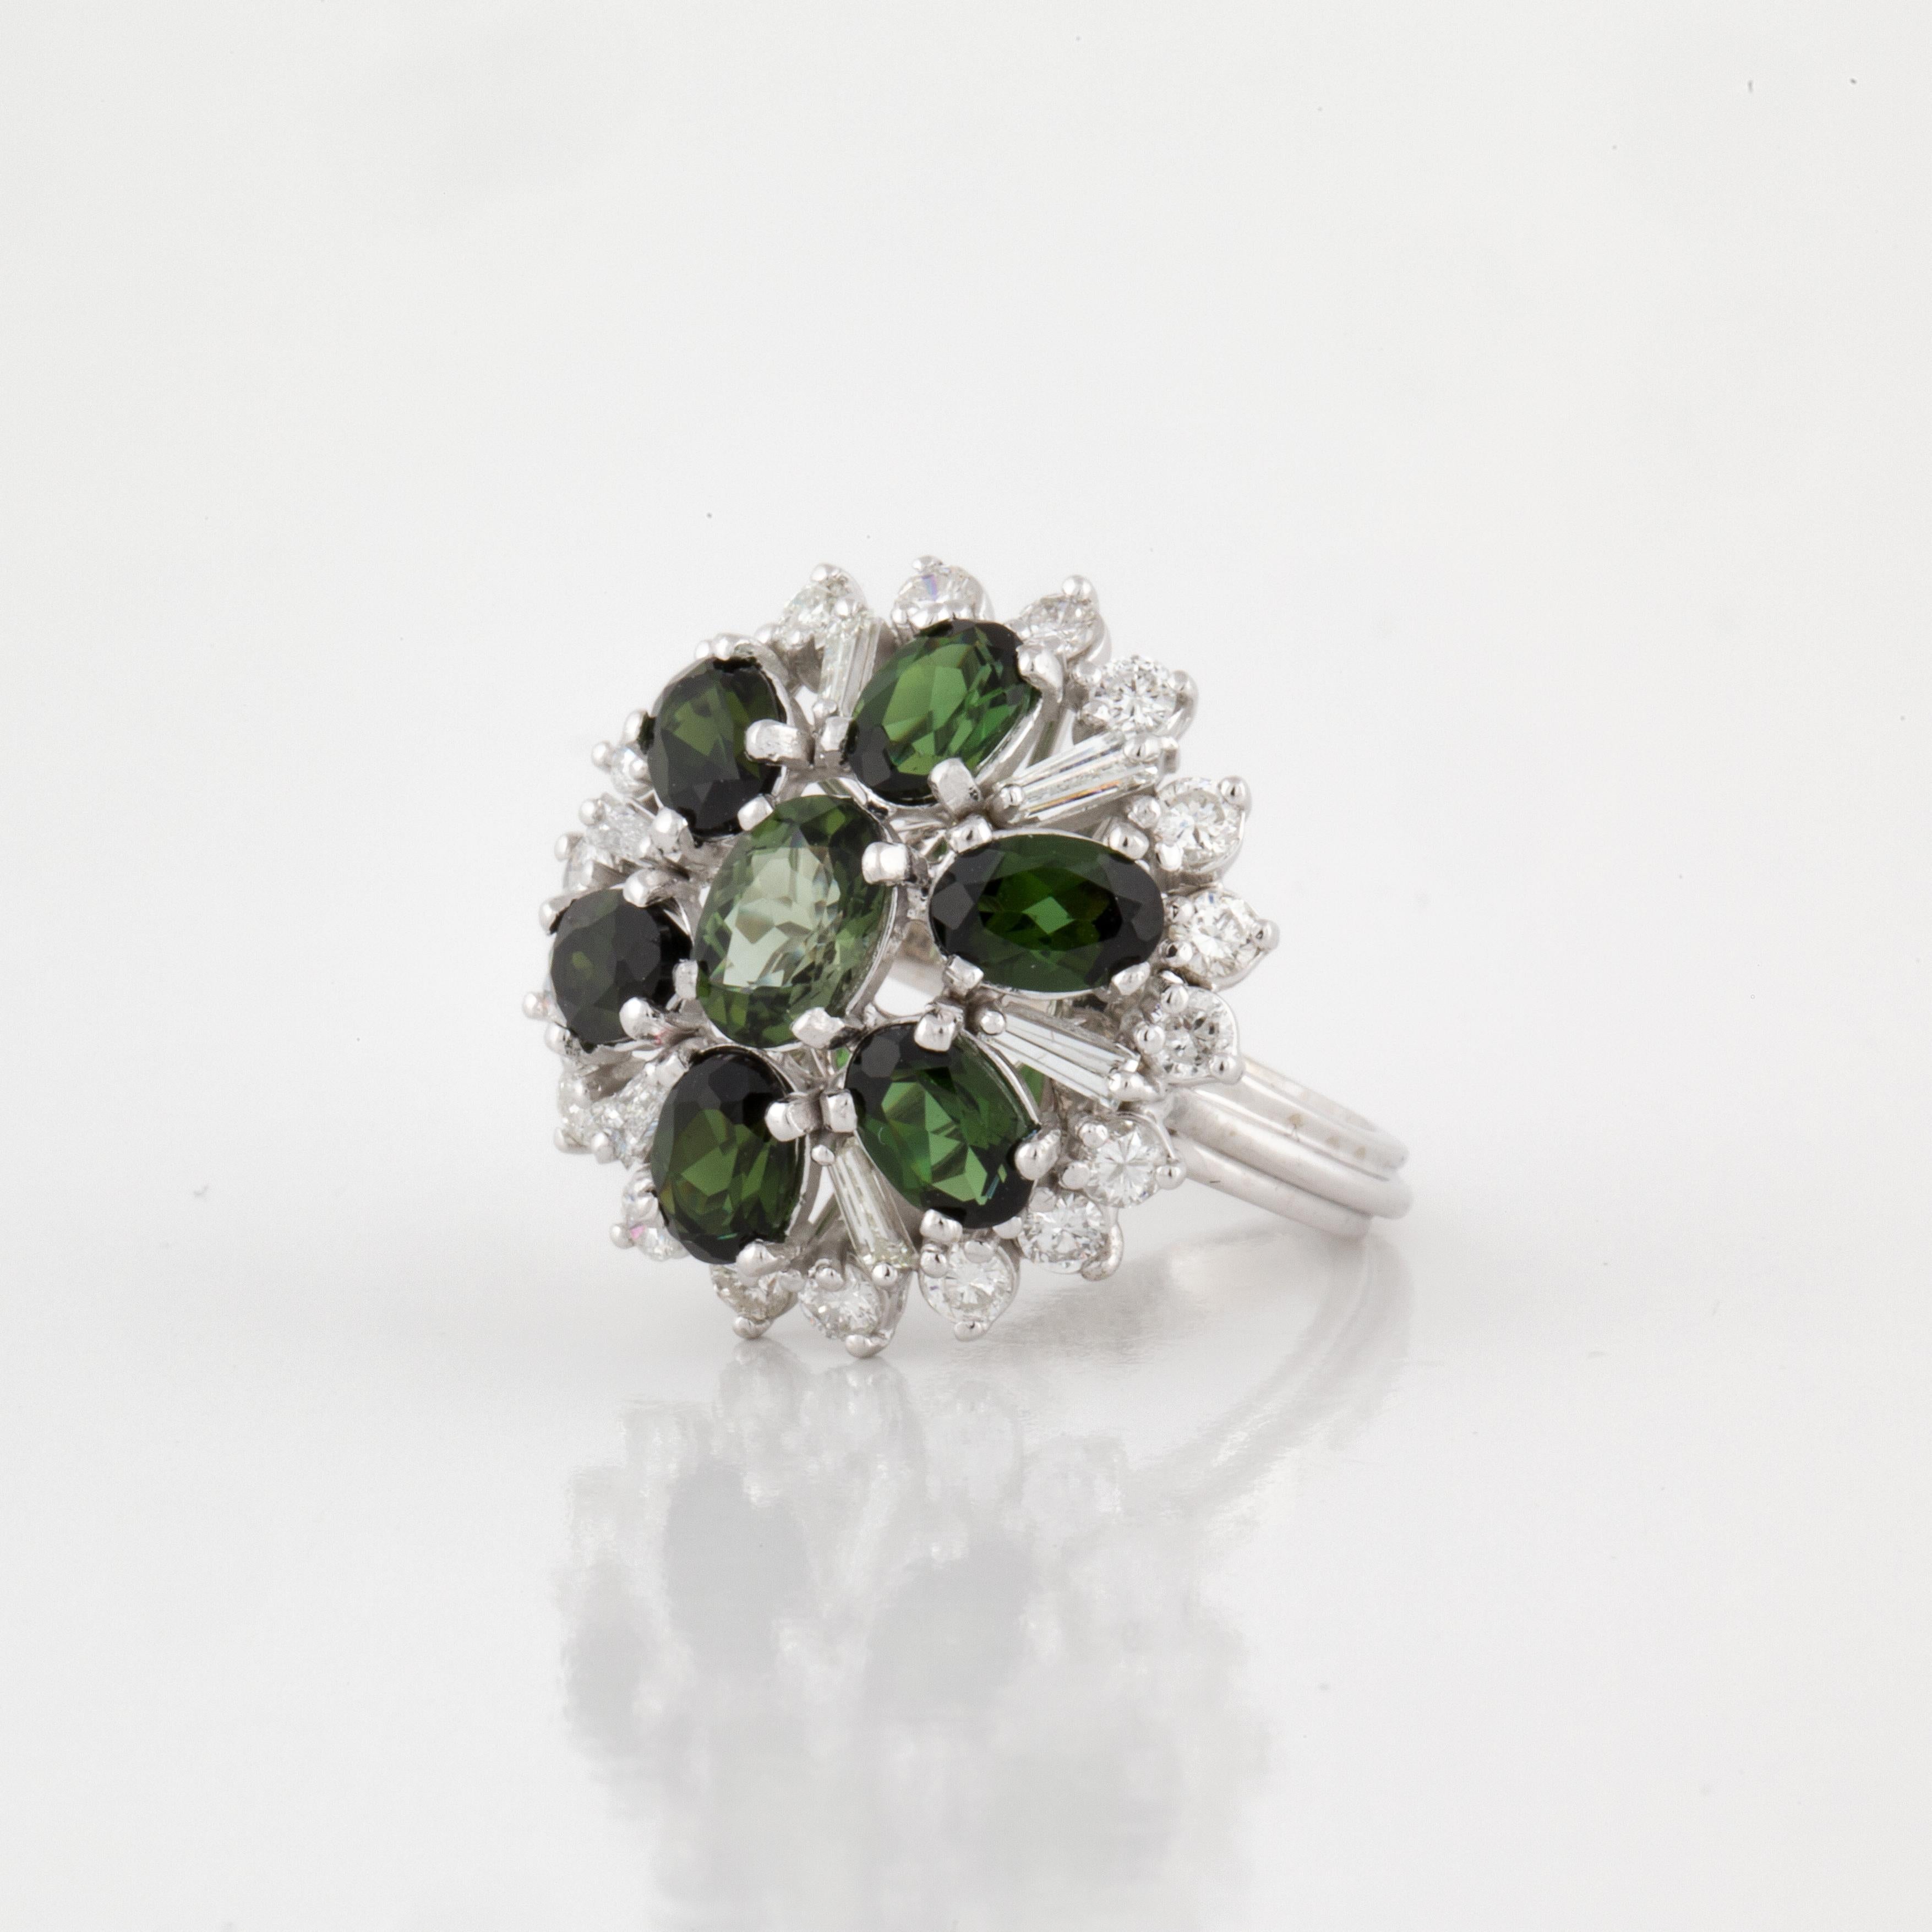 14K white gold cluster ring featuring oval cut green tourmalines accented by round and tapered baguette diamonds.  The diamonds total 1.50 carats; G-I color and VS1-SI1 clarity.  Ring is currently a size 6.  Measures 7/8 inches across and stands 3/8